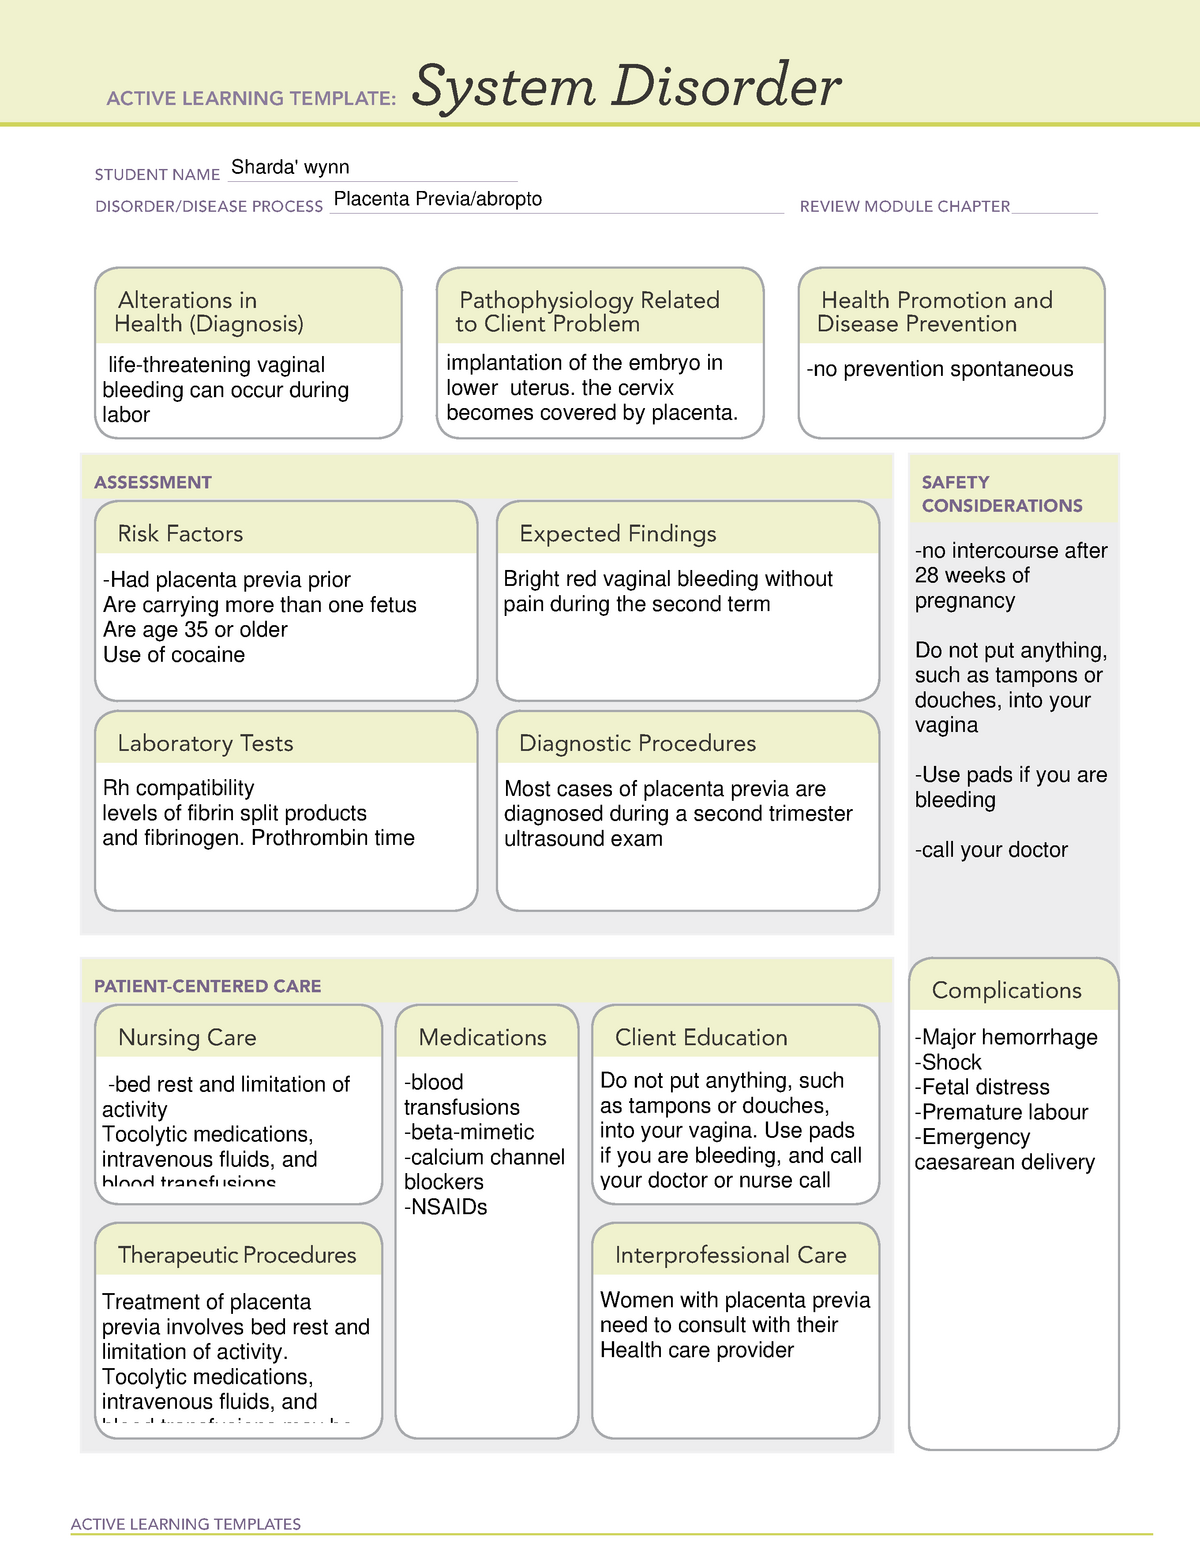 System Disorders-Placenta Previa abrt - ACTIVE LEARNING TEMPLATES ...